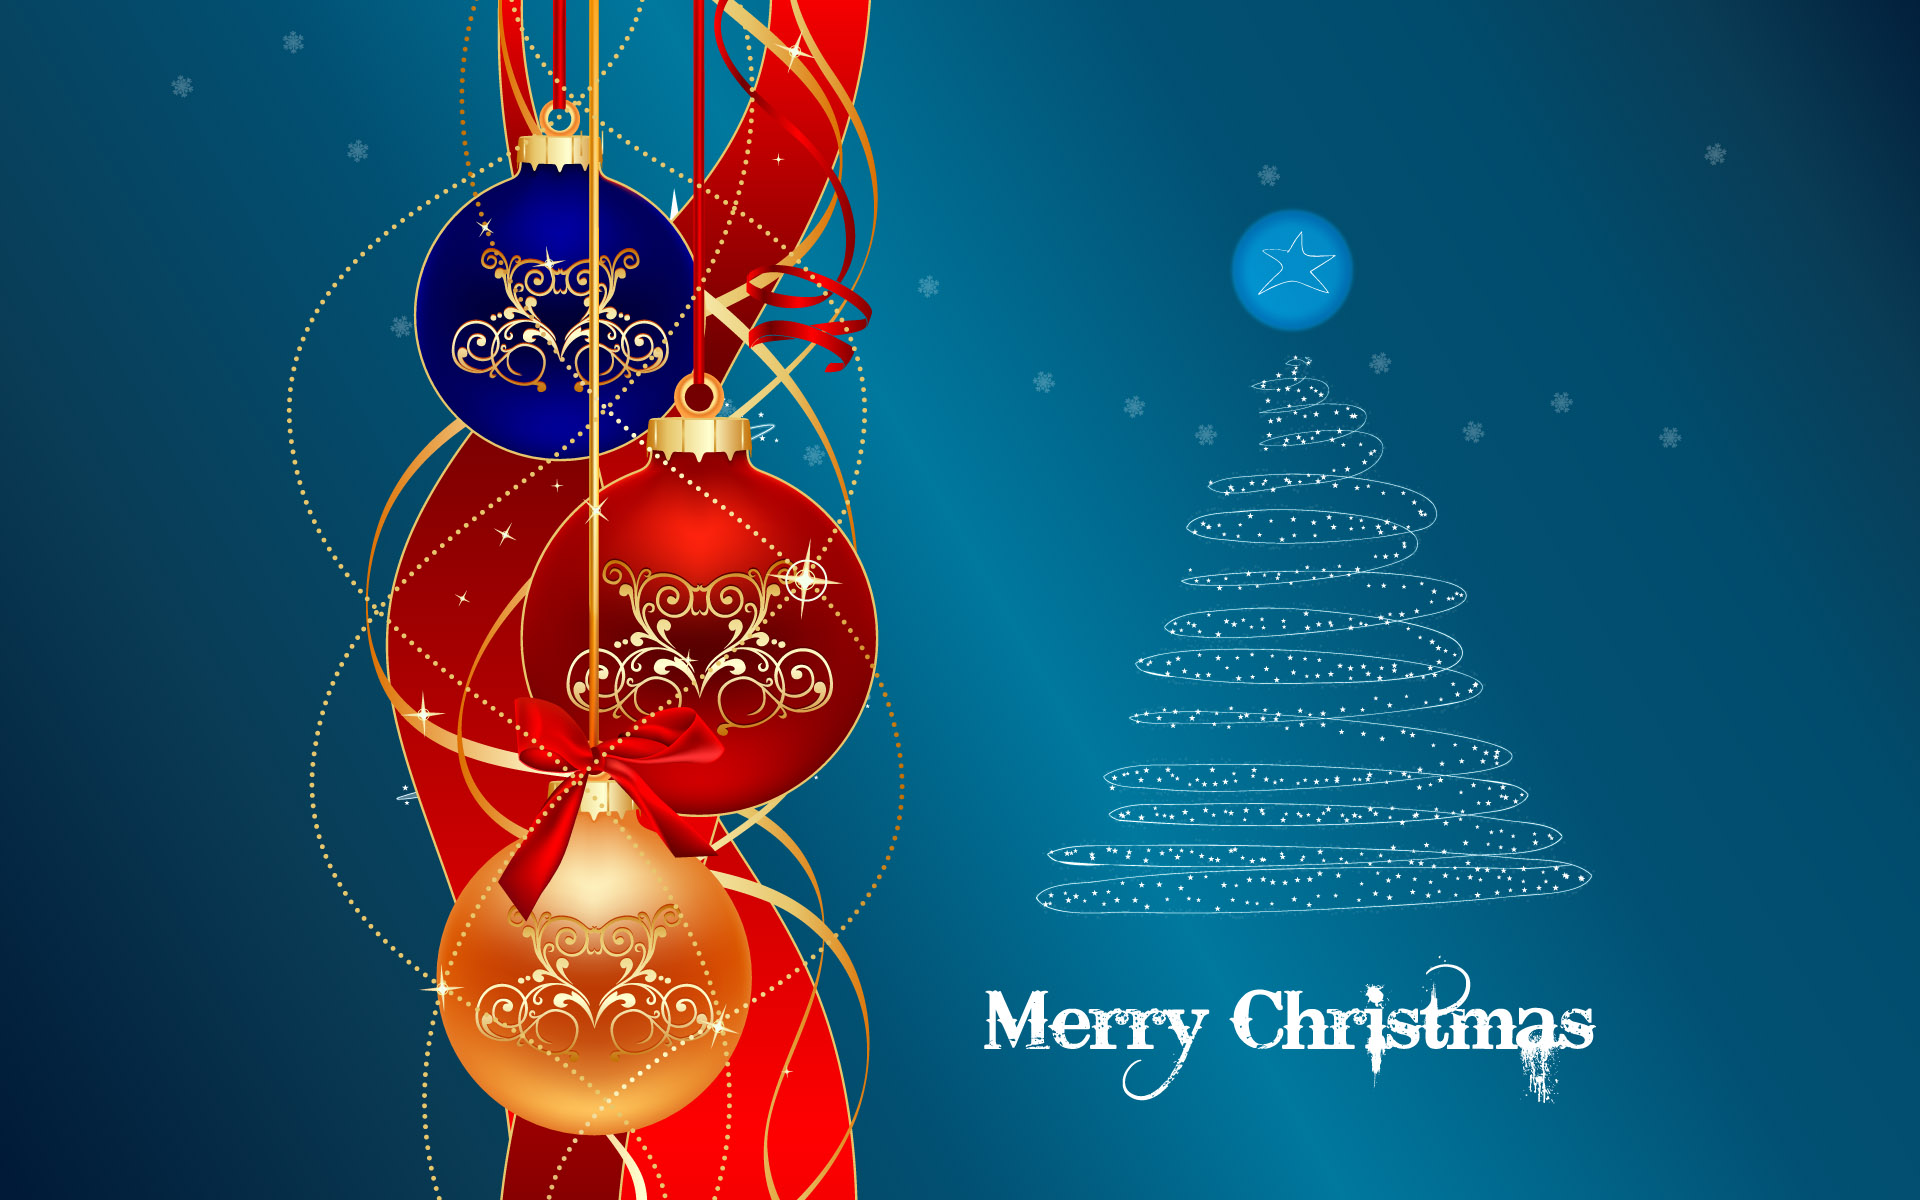 Merry Christmas Images High Resolution , HD Wallpaper & Backgrounds